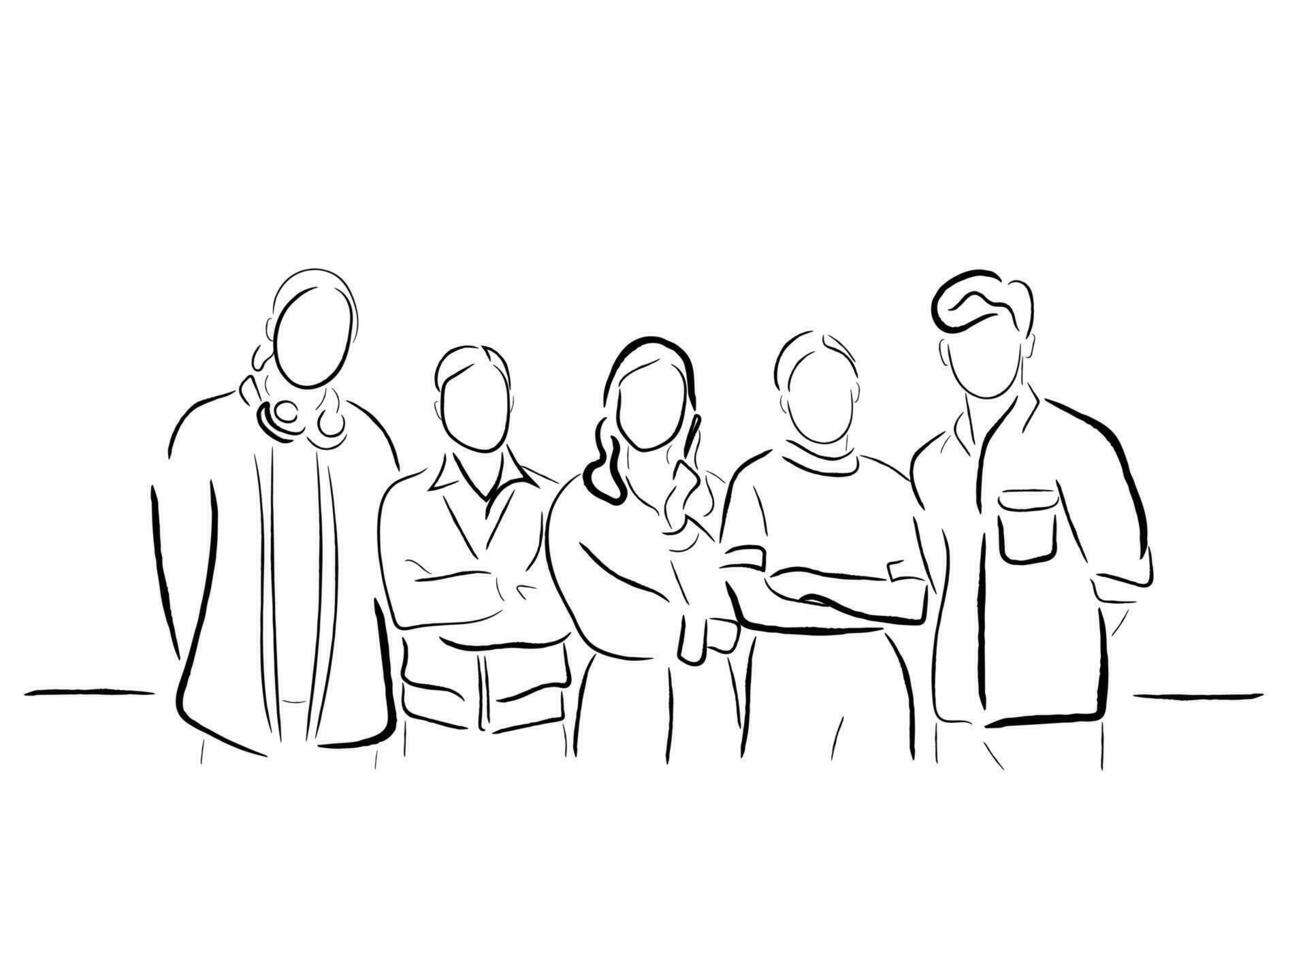 lIne art vector of a group of people together. Colleagues together.